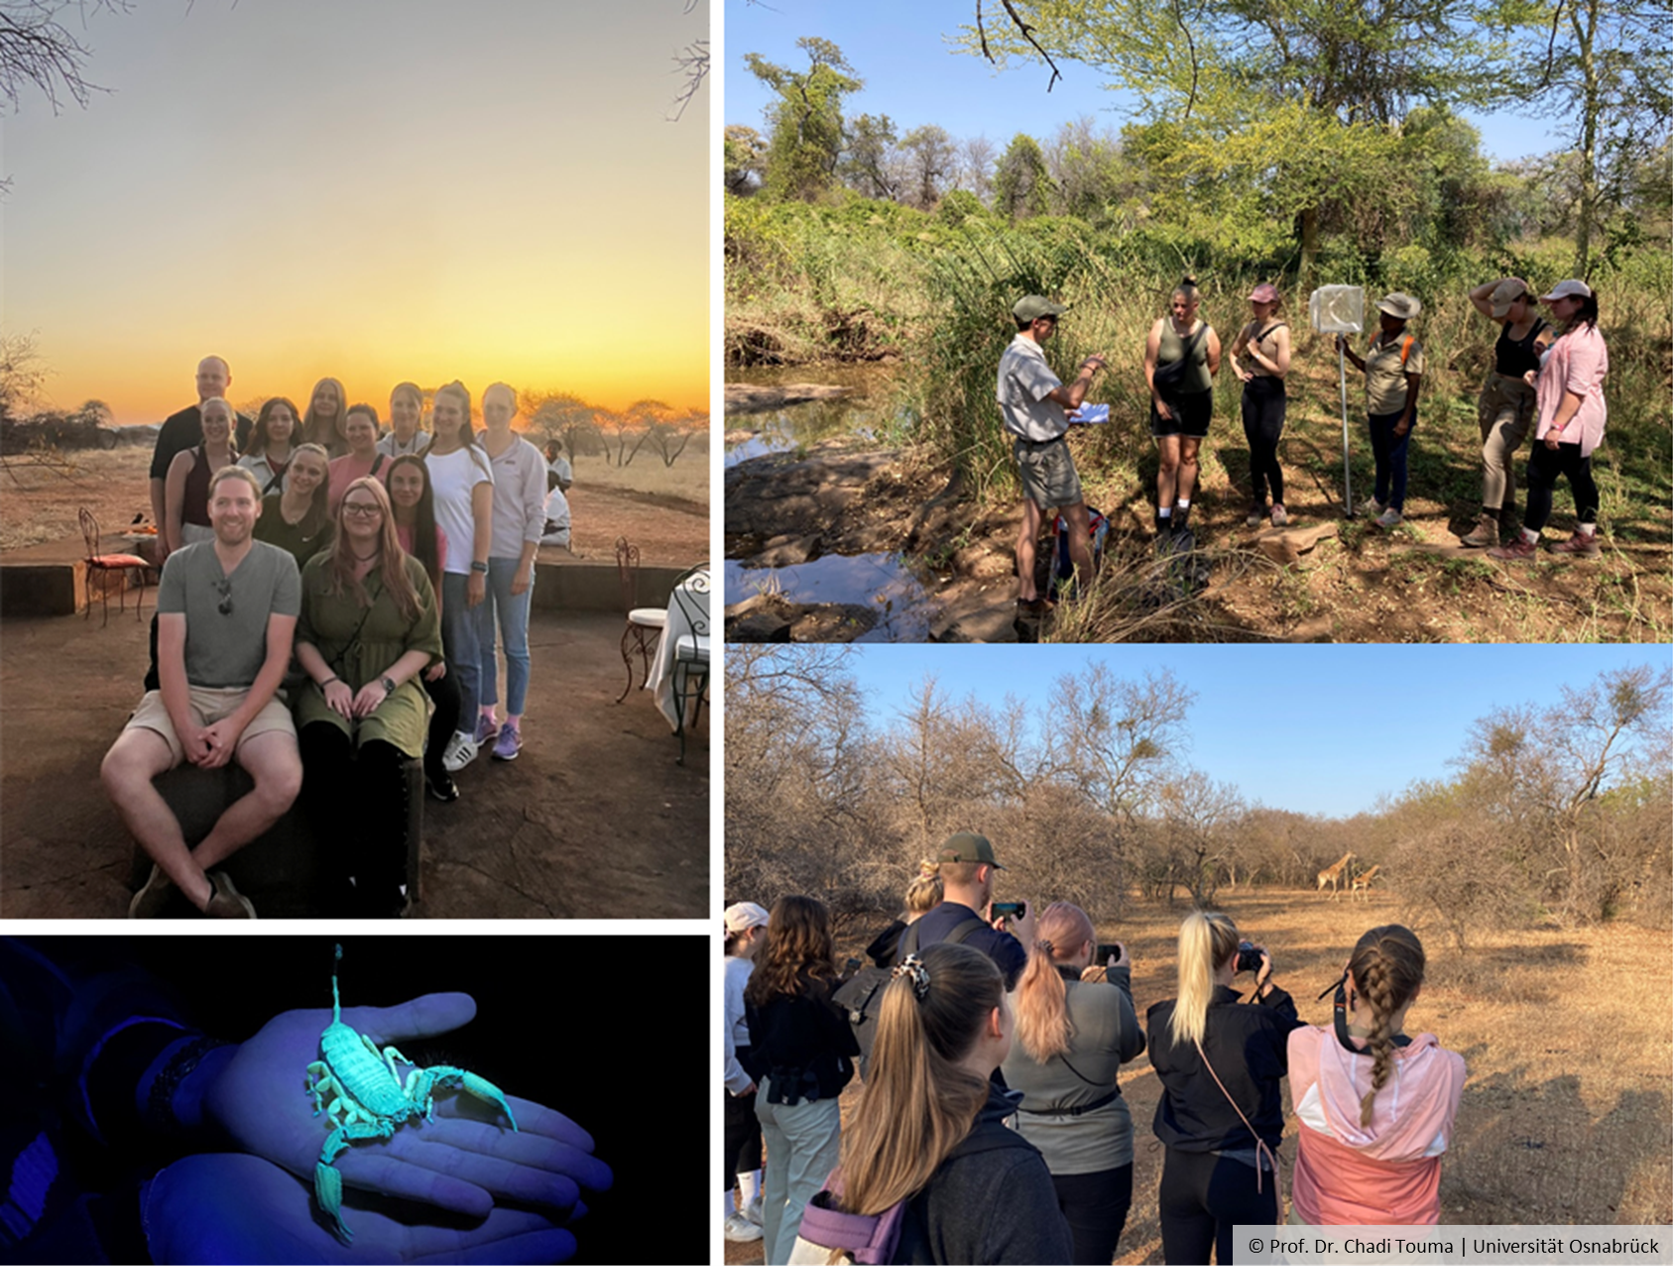 Four images combined. image 1: smiling people; image 2: people with a net in the field, listening to a person apparently explaining something. image 3: a scorpion; image 4: A group of people taking pictures of giraffes in the distance.